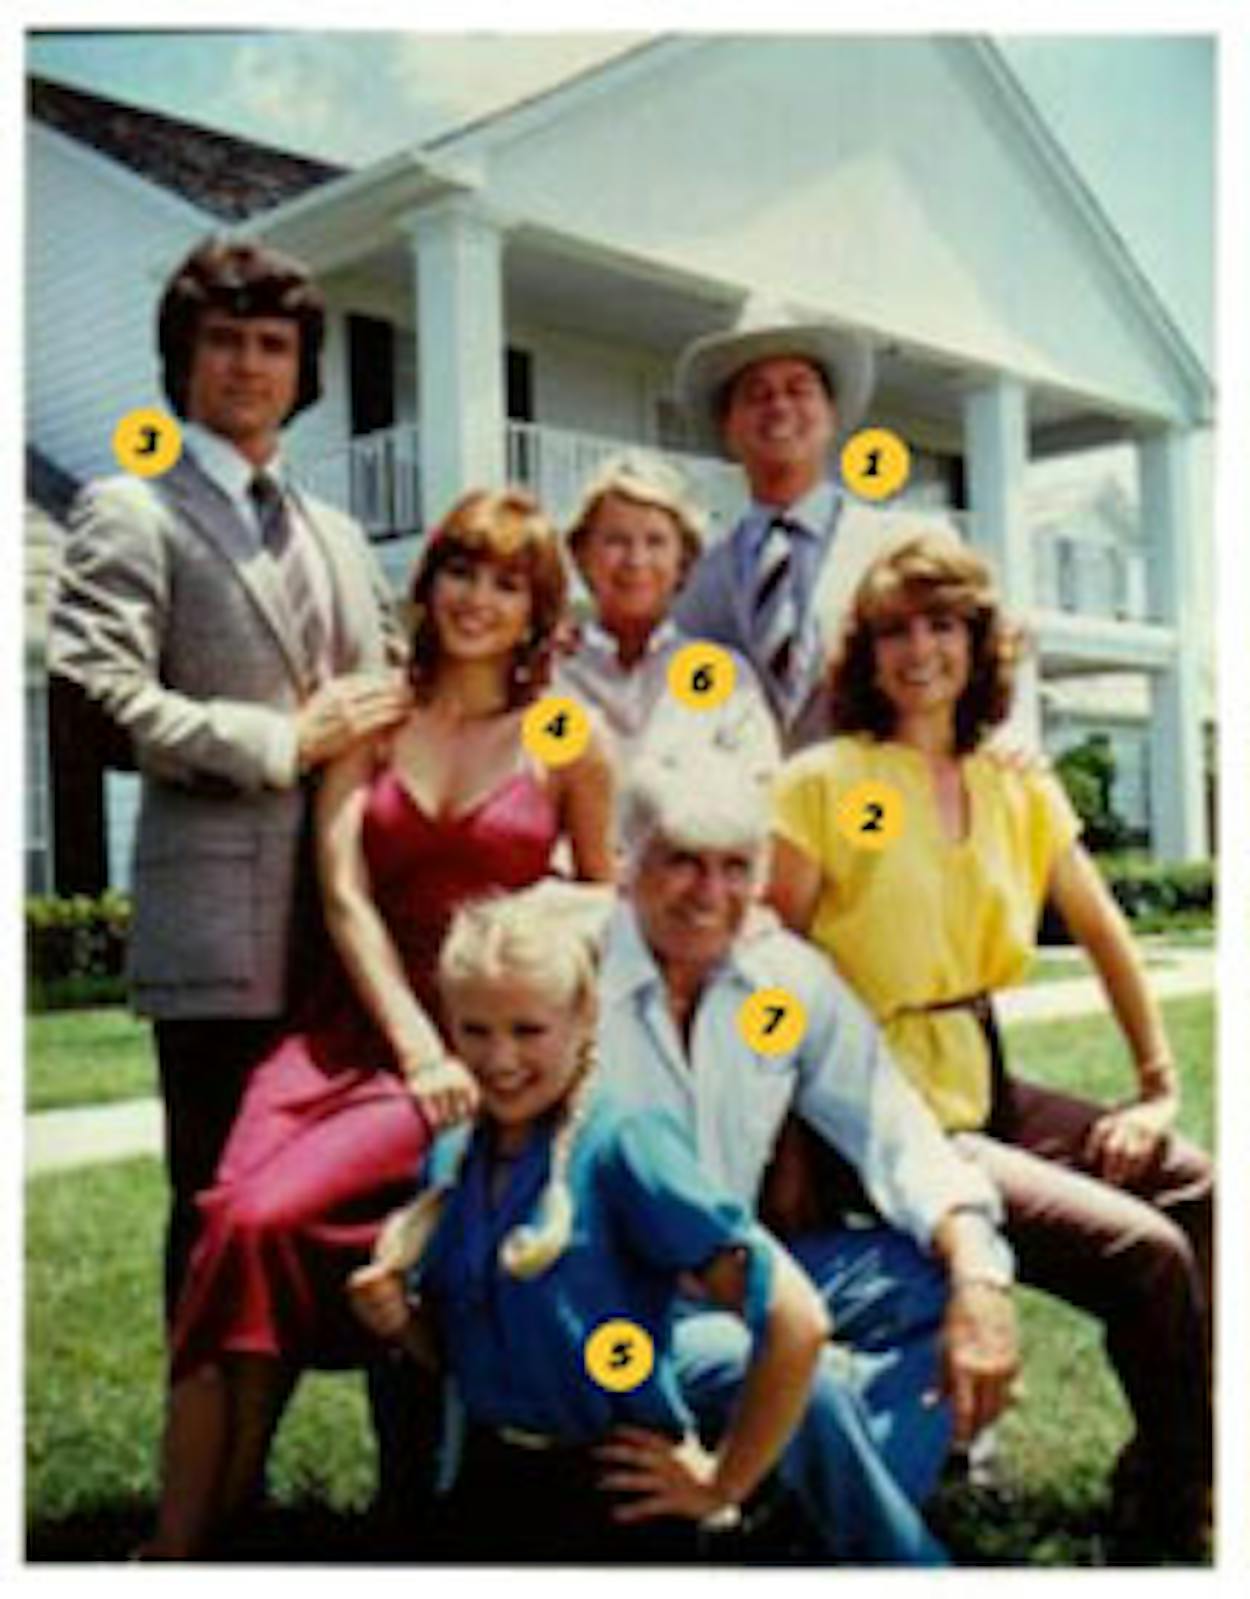 Dallas cast poses in front of a big white house.